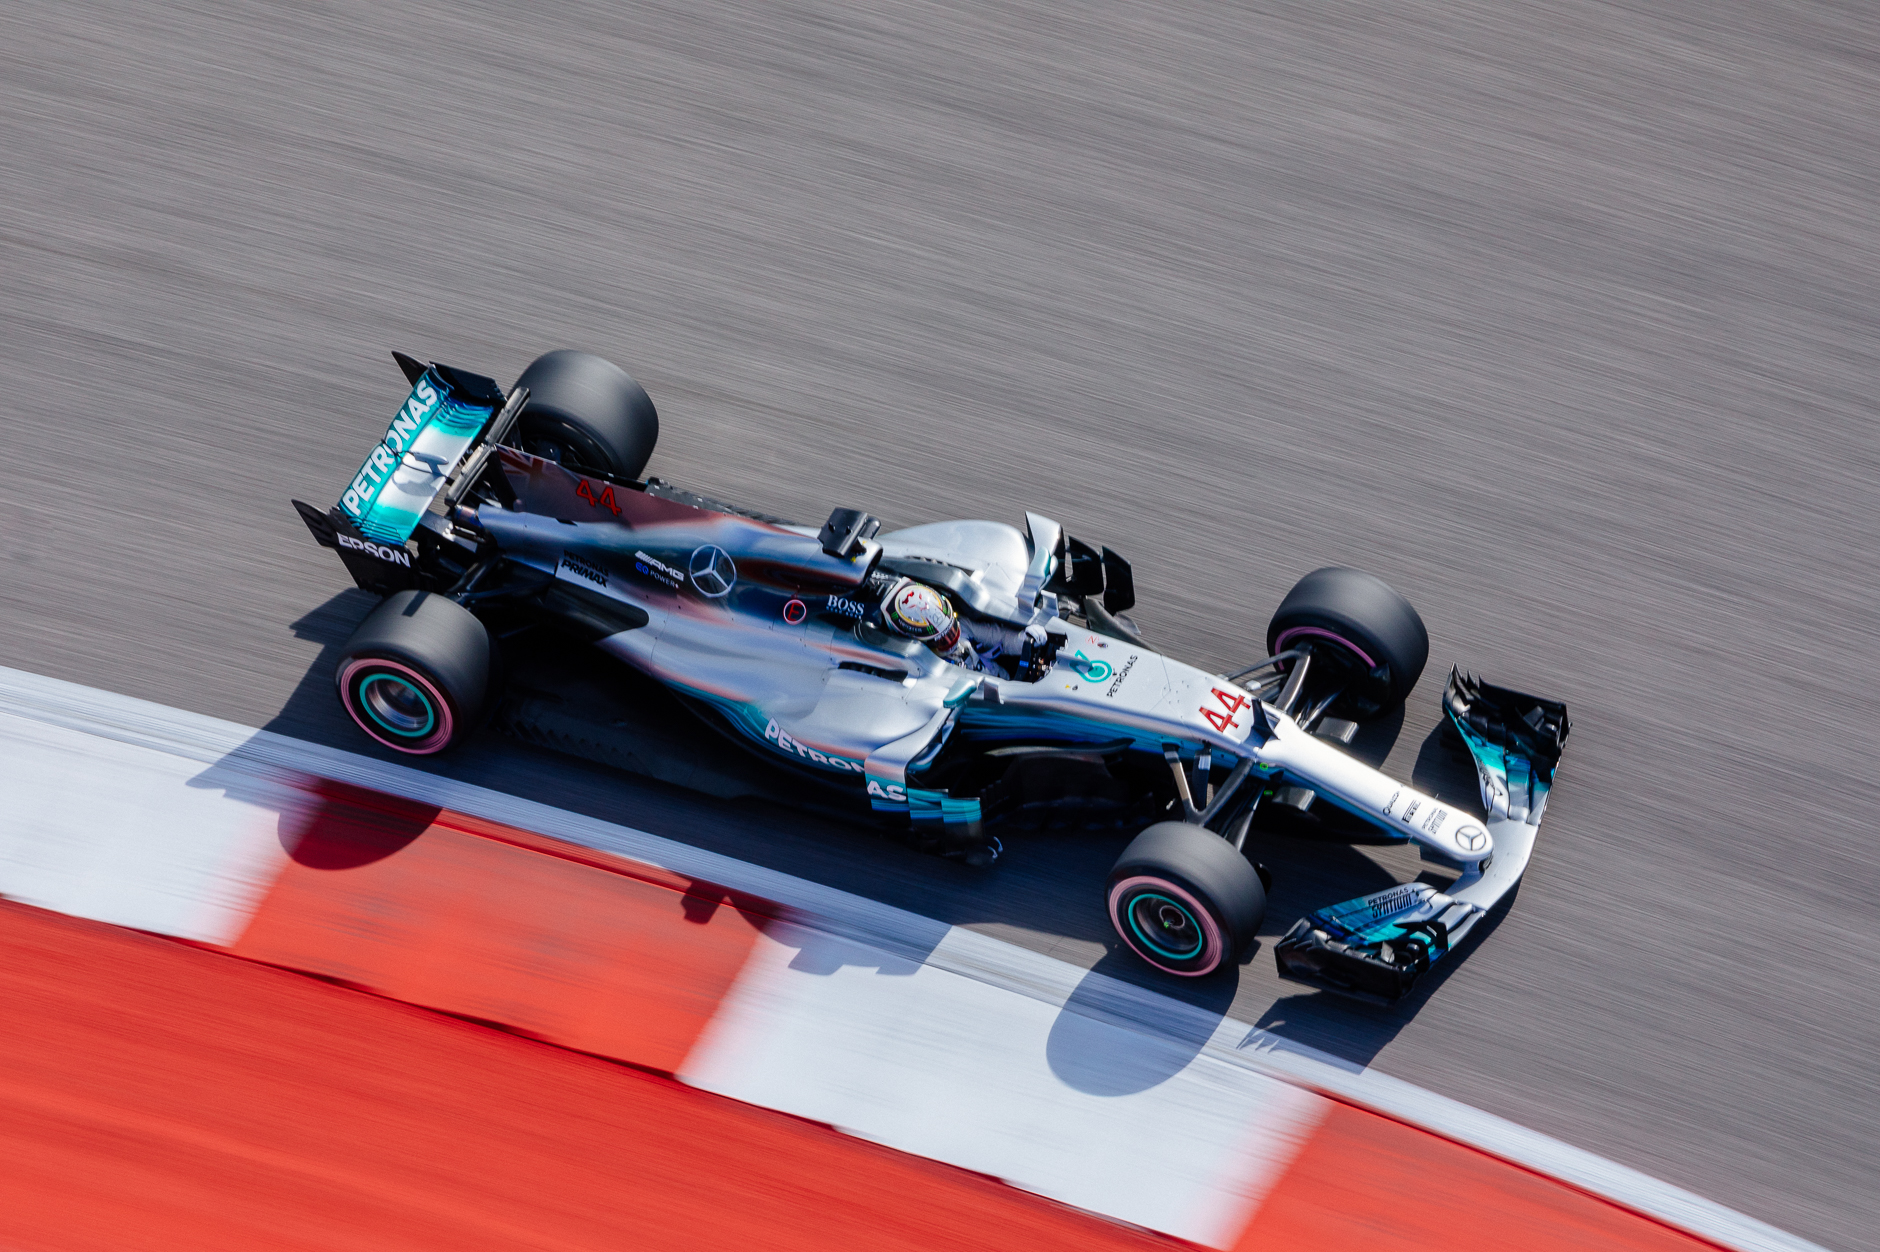 Mercedes AMG Petronas' Lewis Hamilton during FP3 as seen from the COTA observation tower.